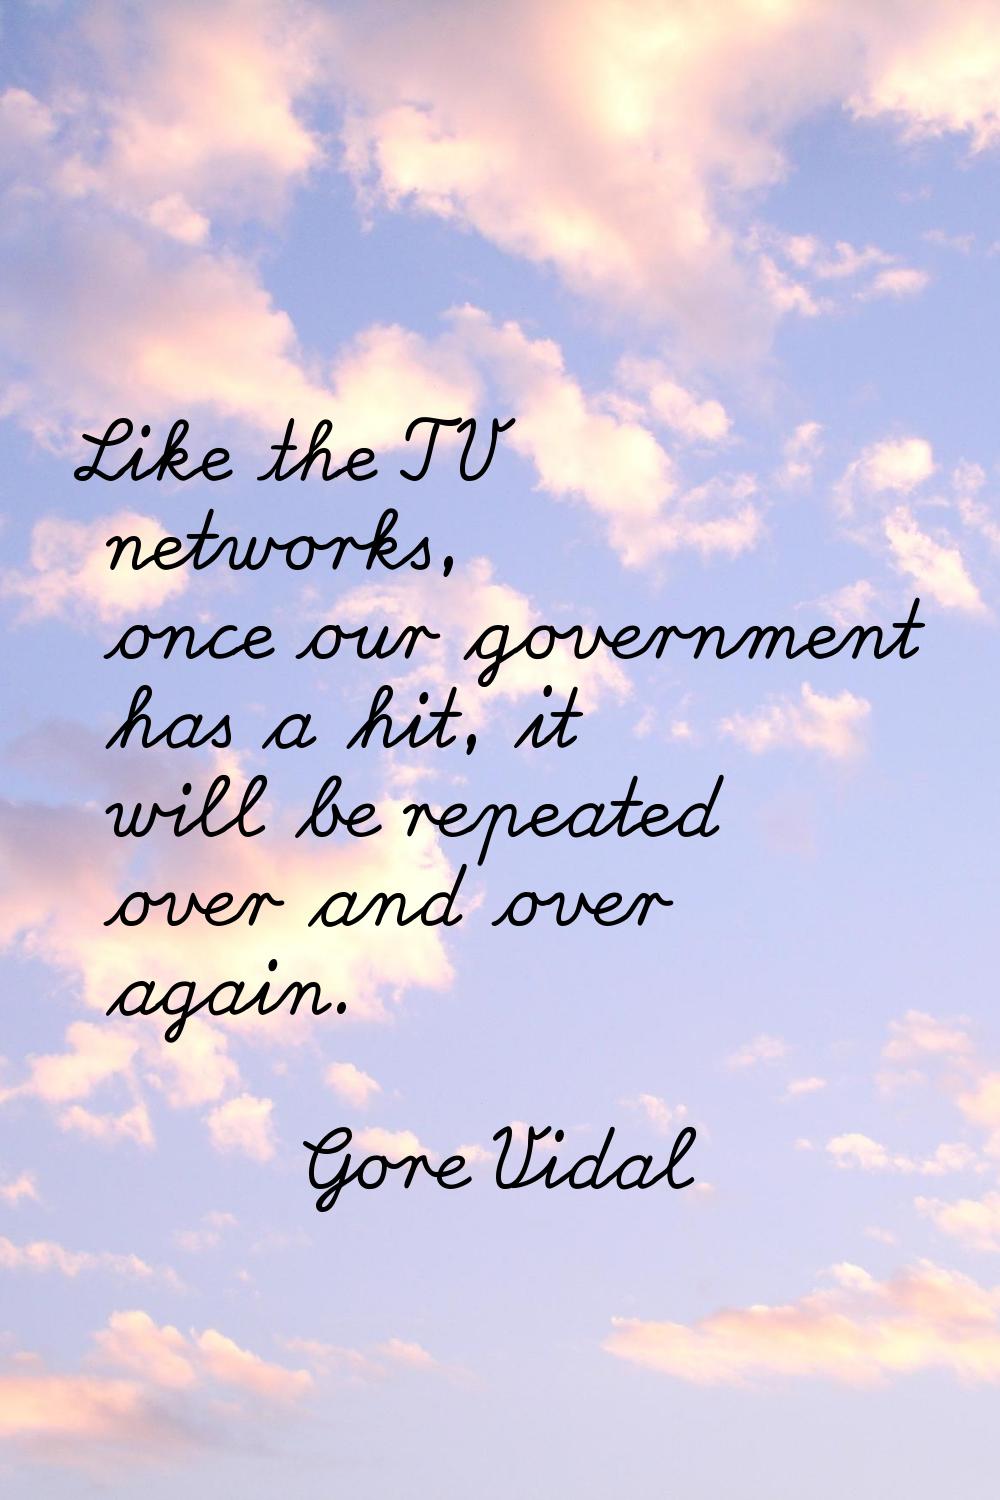 Like the TV networks, once our government has a hit, it will be repeated over and over again.